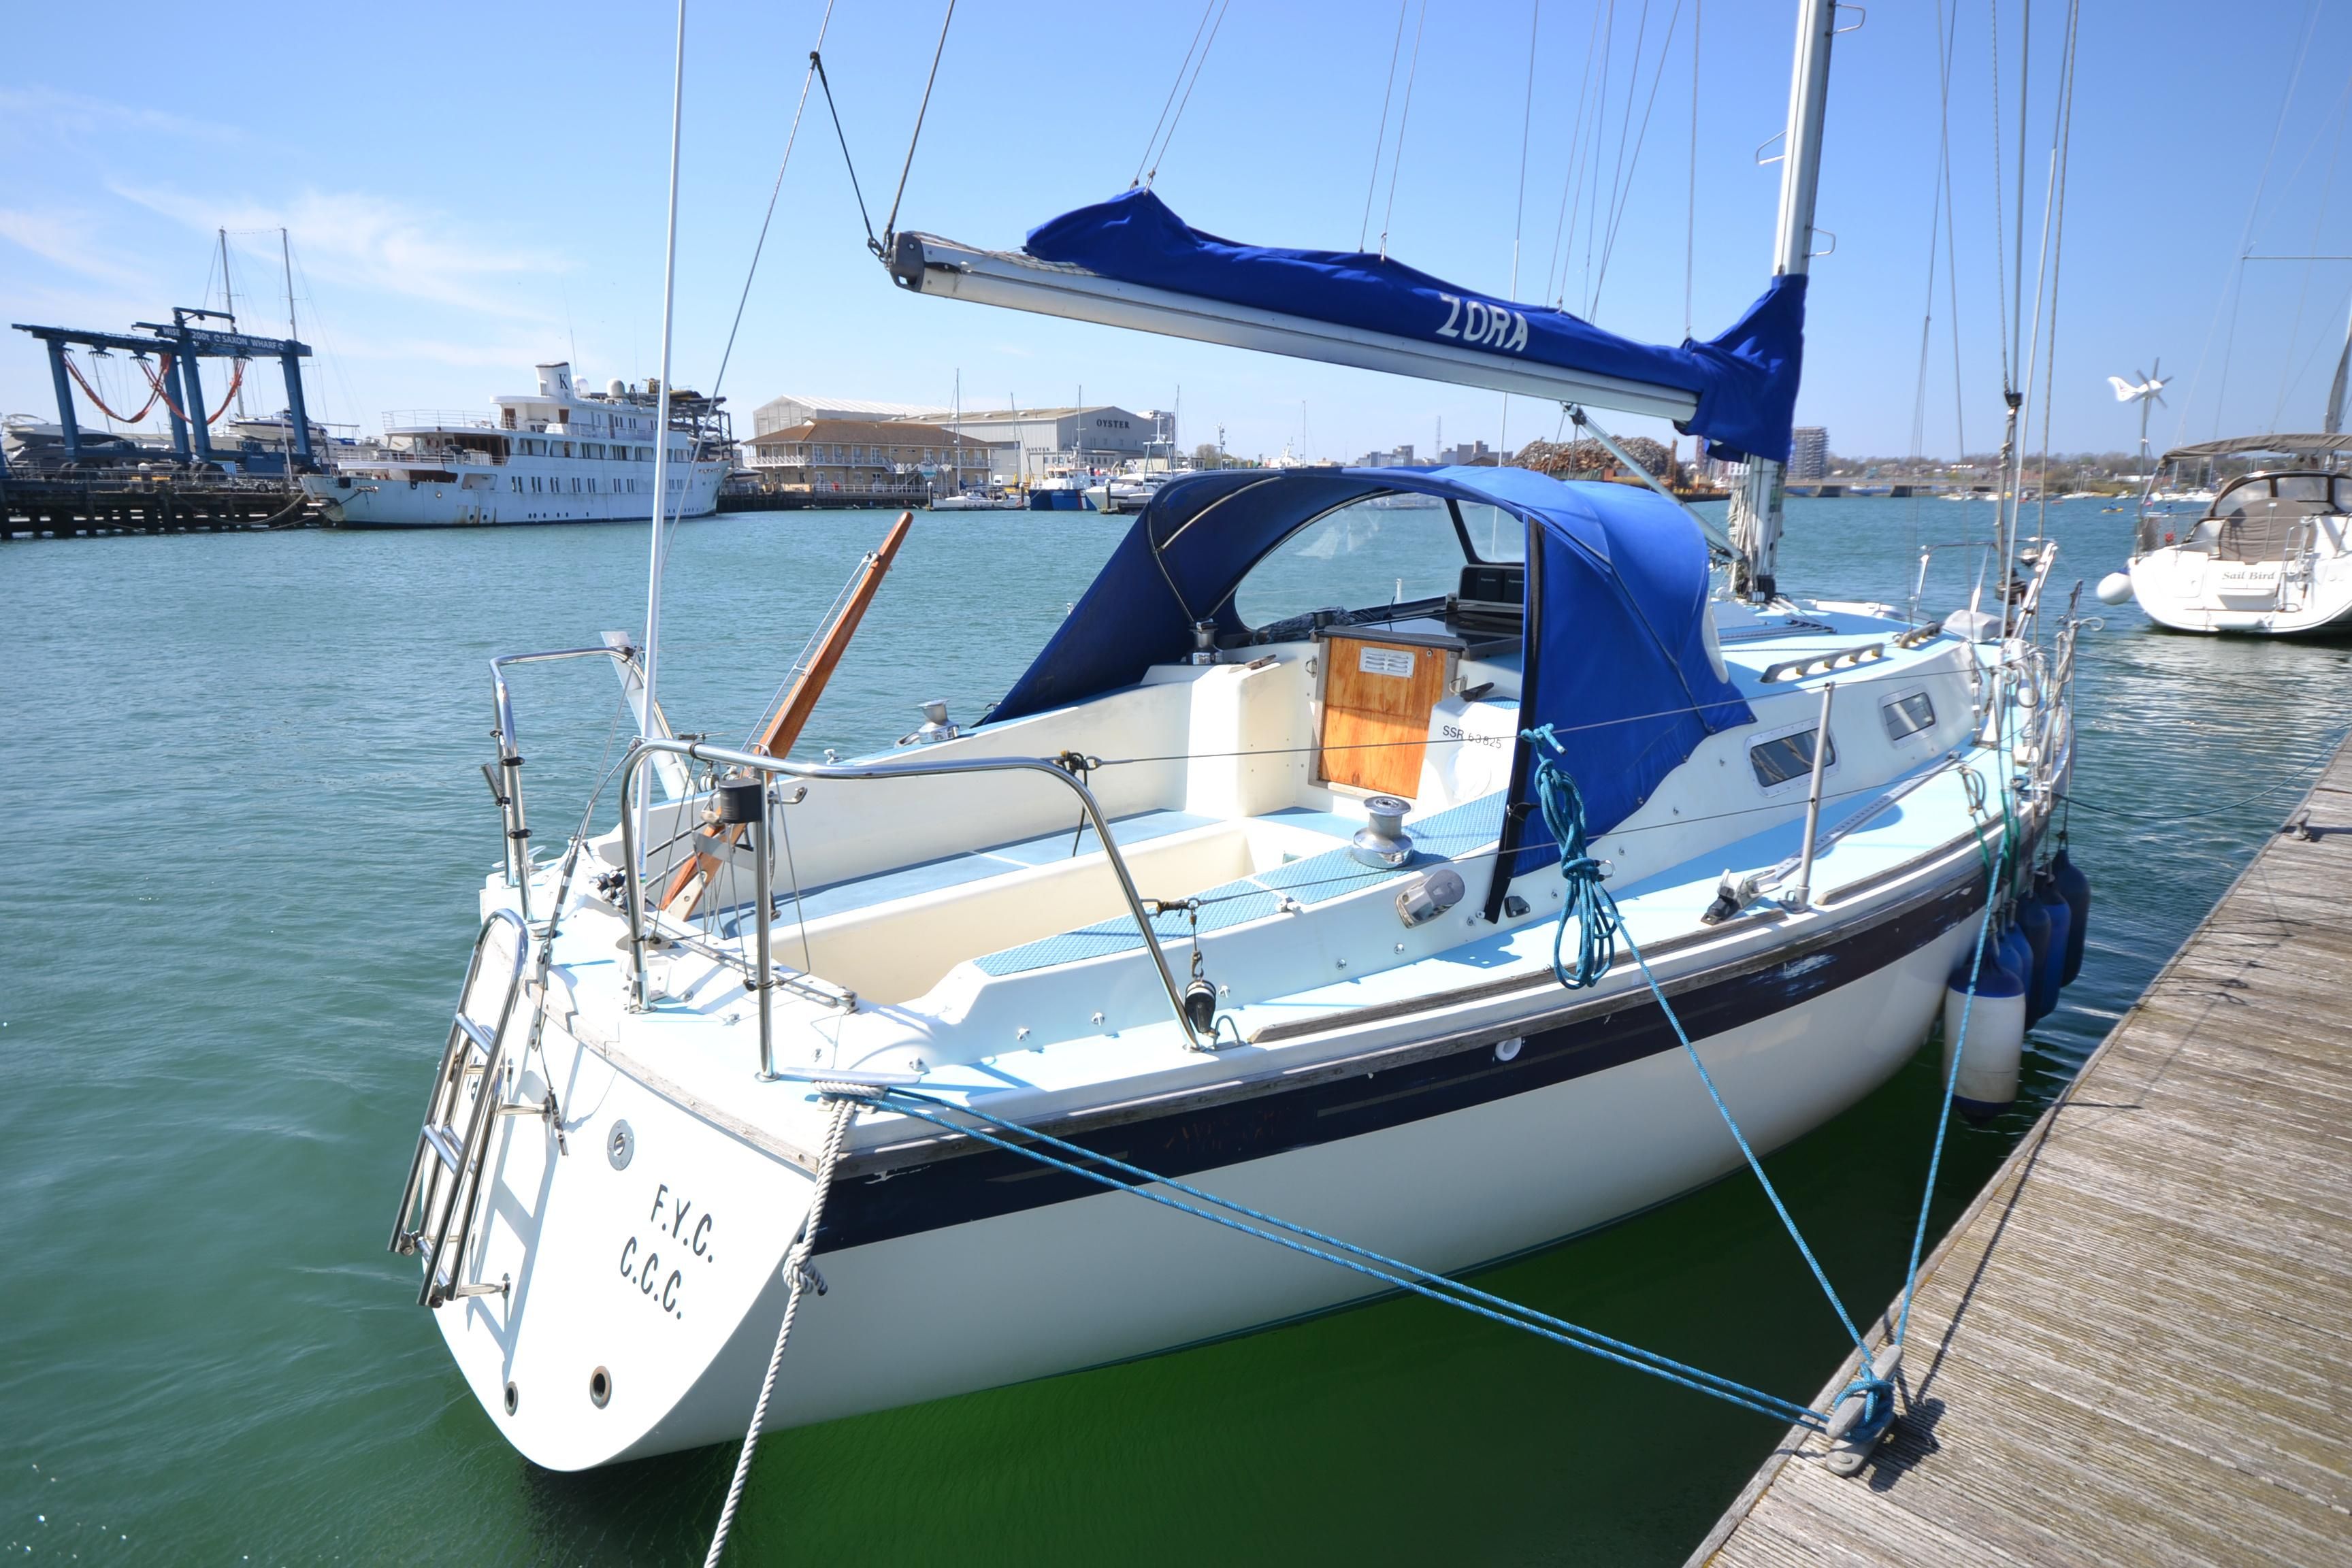 westerly 32 sailboat